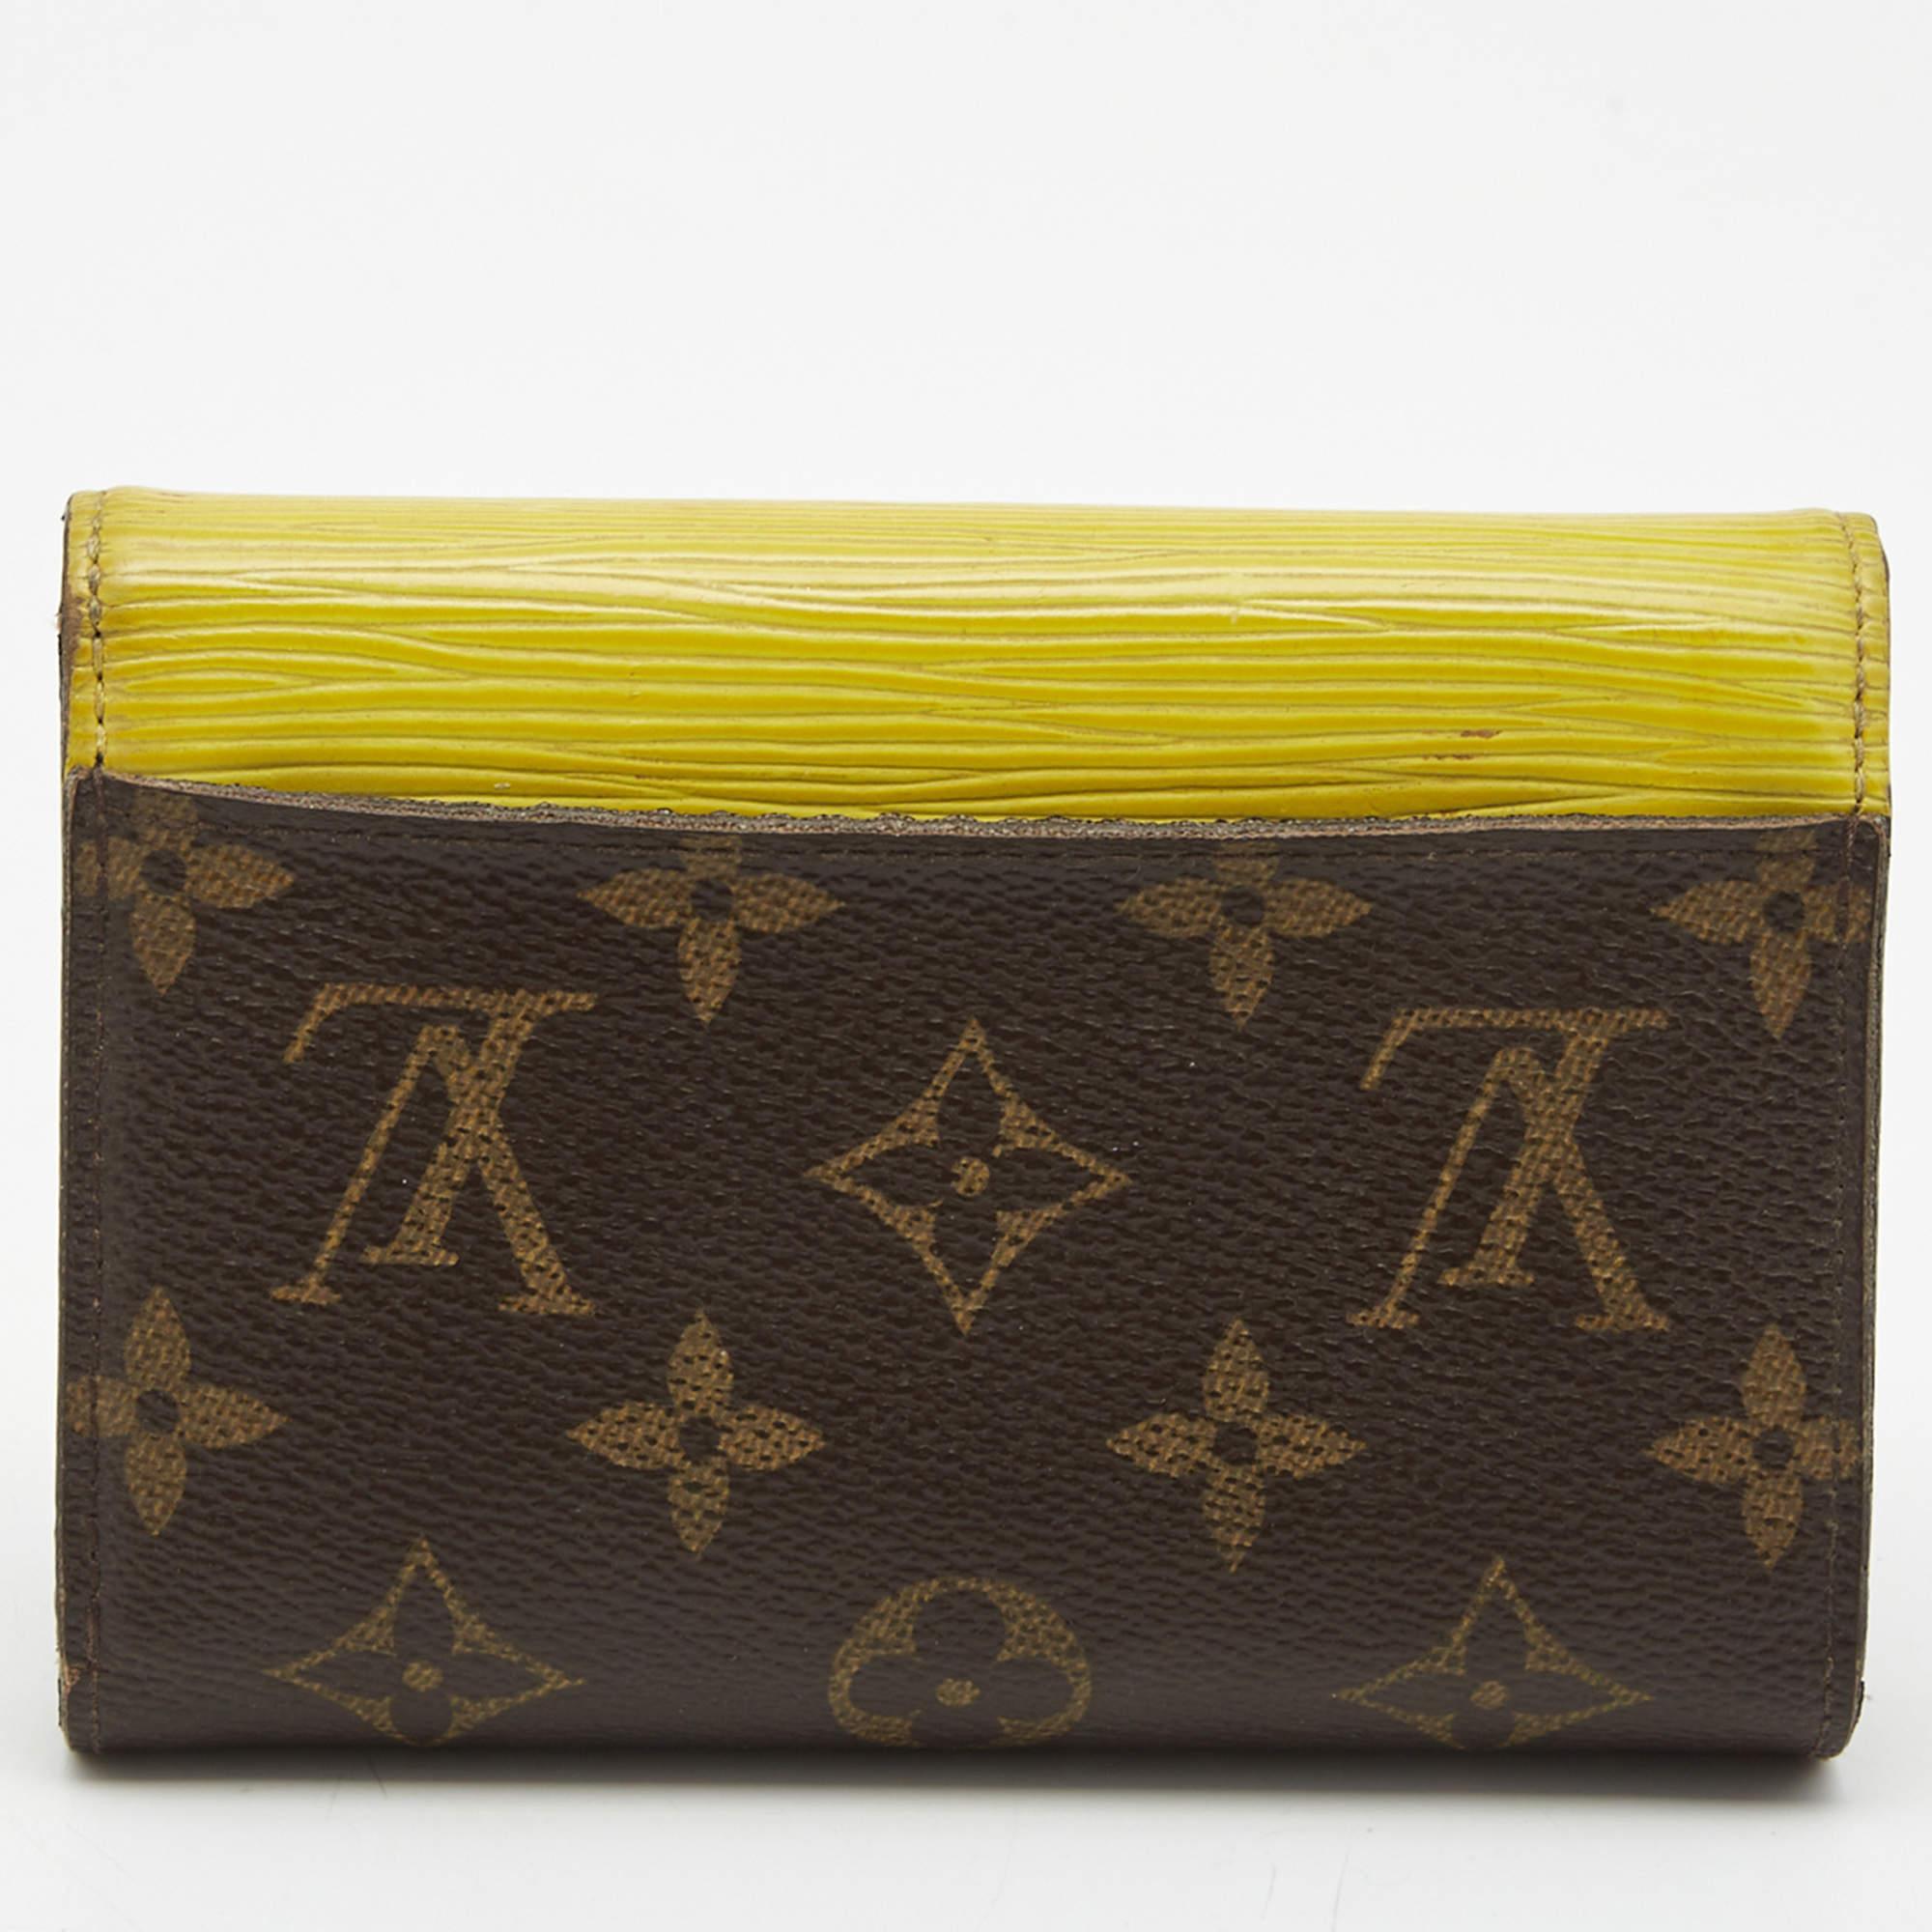 Bringing a fine mix of fashion and fine craftsmanship is this flap compact wallet from Louis Vuitton. The designer women's wallet comes crafted from Pistache Ep leather along with Monogram canvas and is designed with silver-tone hardware.

